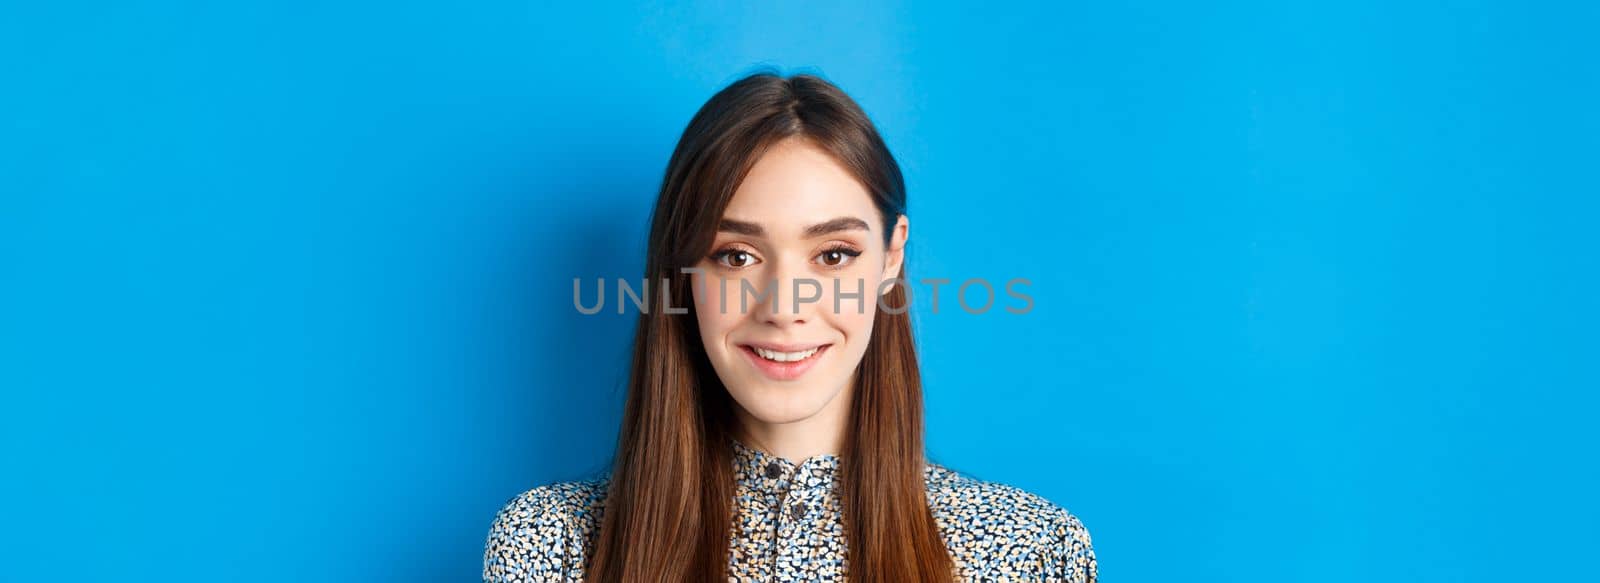 Close-up portrait of attractive natural girl with long hair and makeup, smiling happy and friendly at camera, blue background.